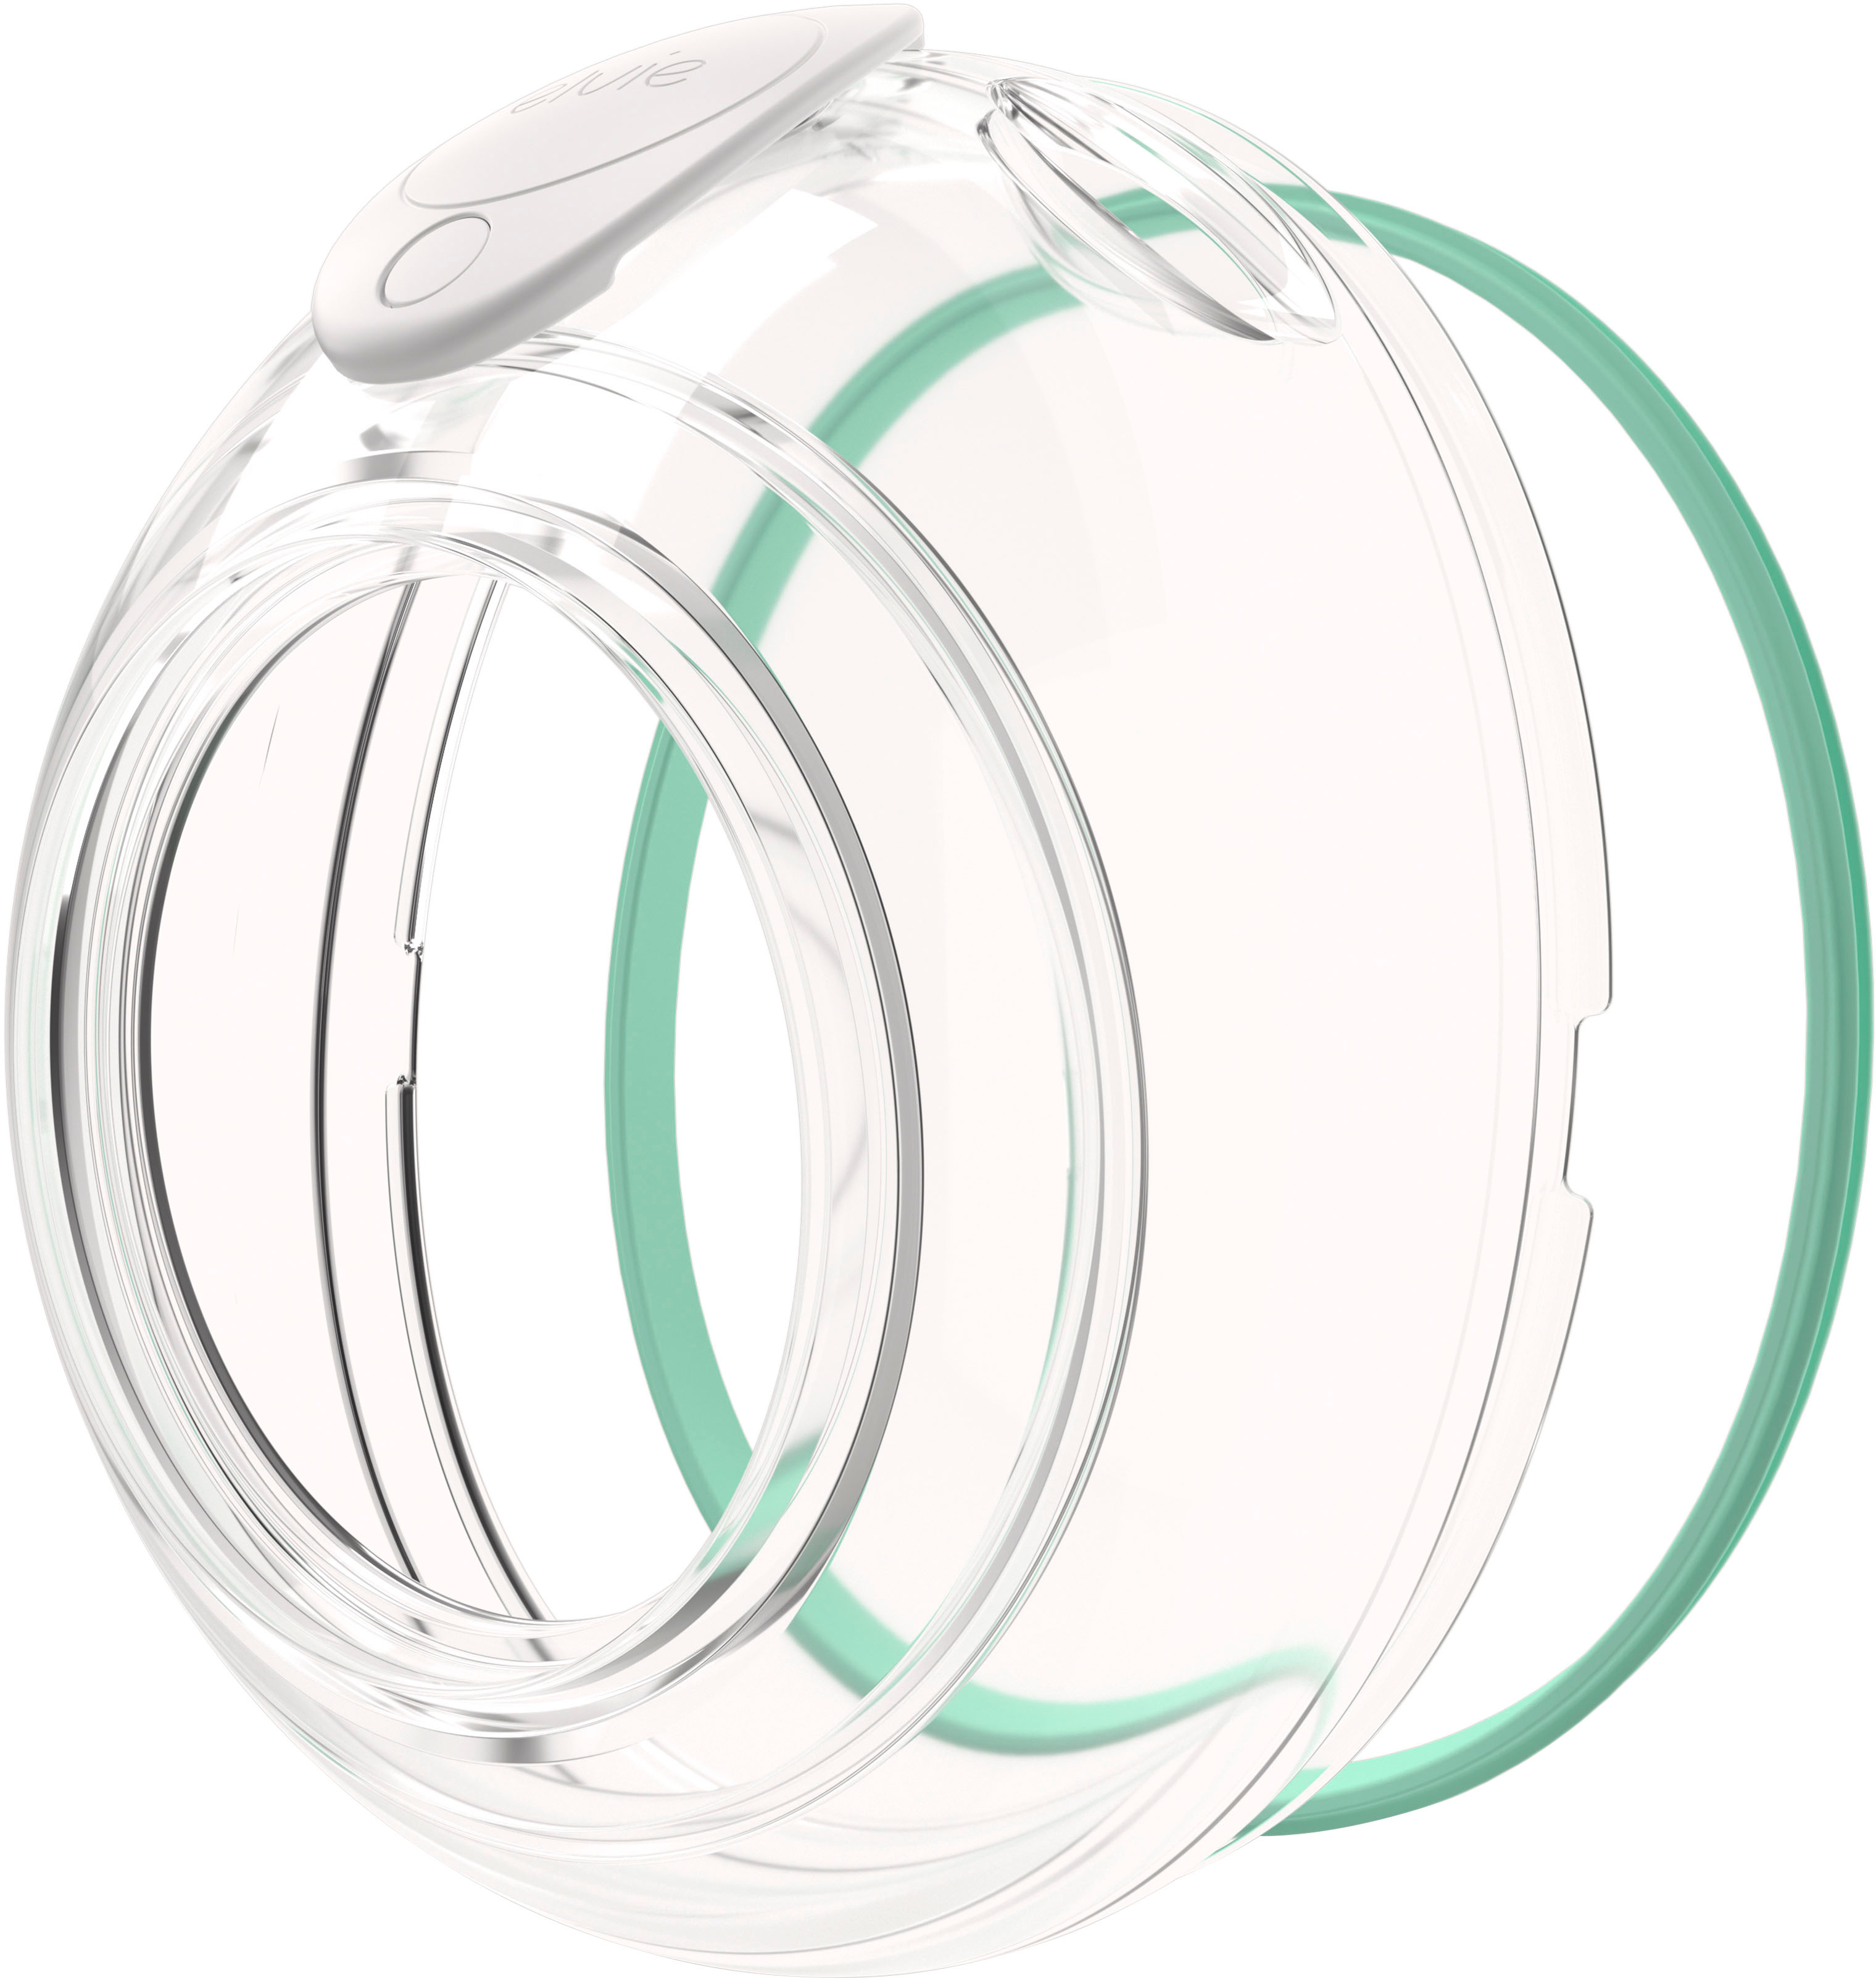 Elvie Stride Cup front x 2 + Bands x2 + Stopper x2 Clear, Green EB01-CUP02  - Best Buy